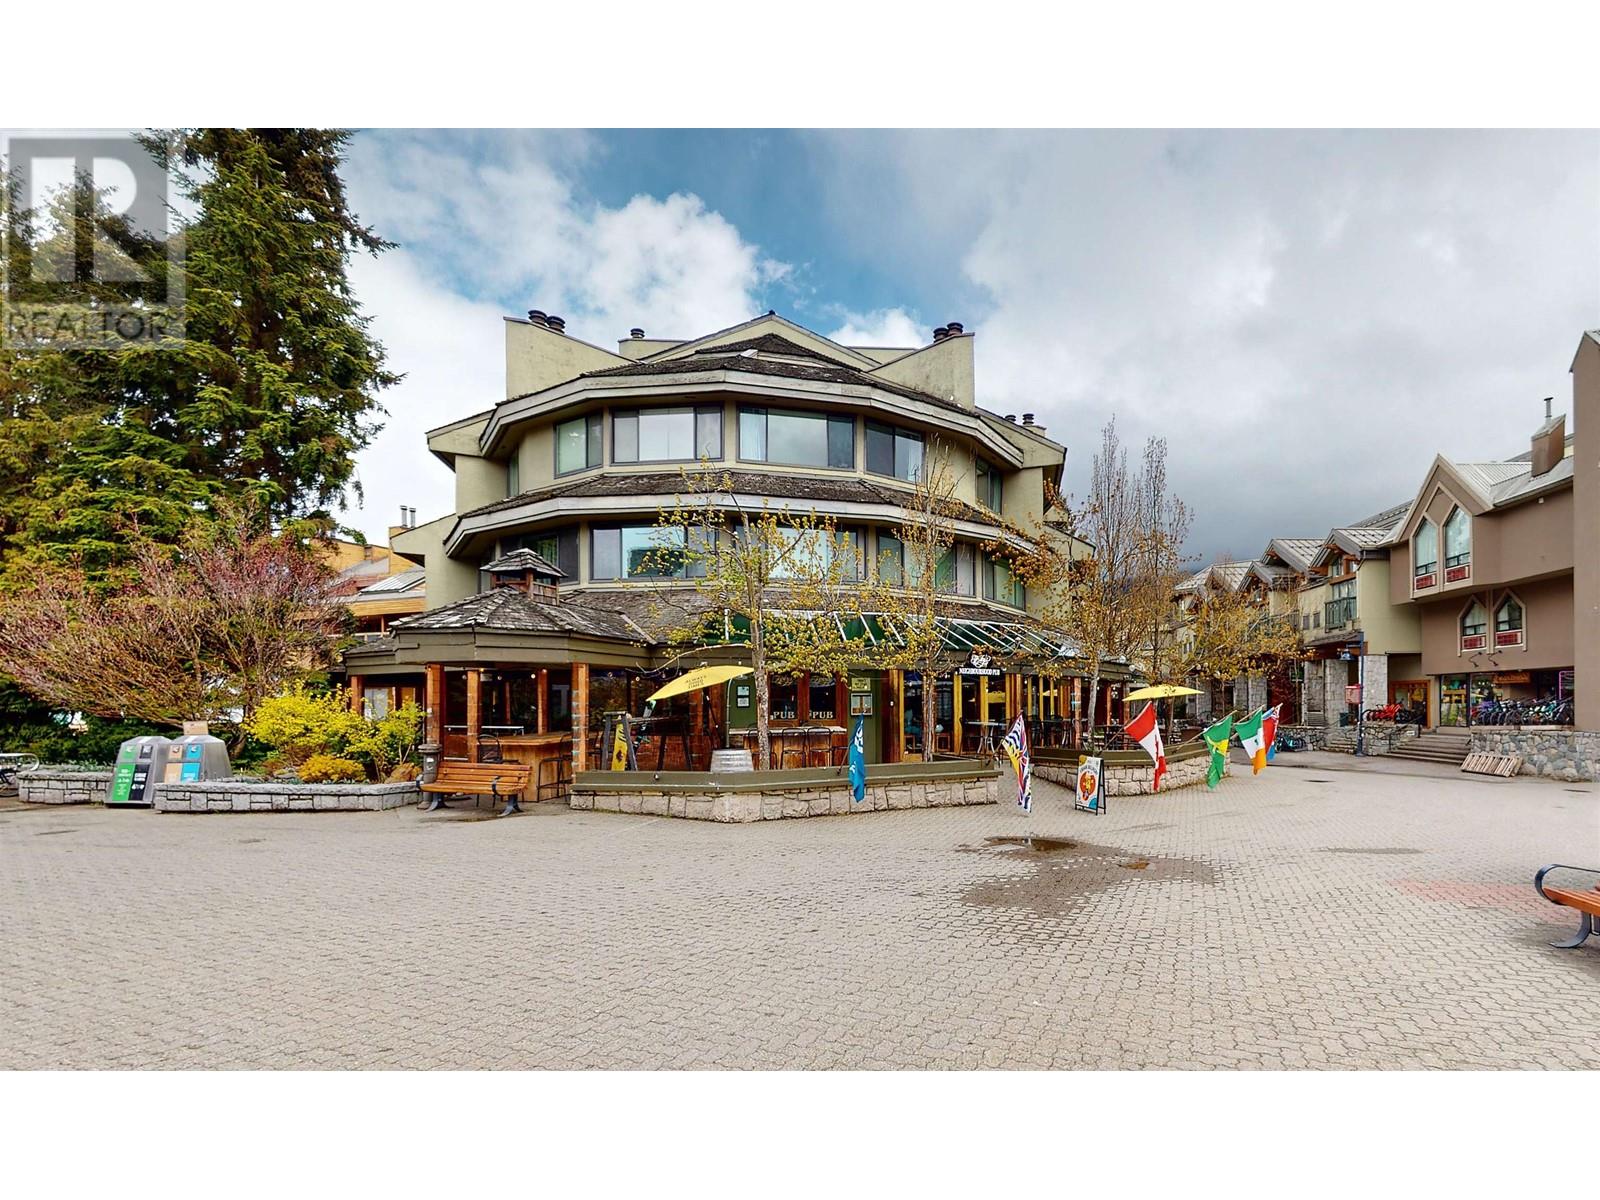 301 4111 GOLFERS APPROACH, whistler, British Columbia